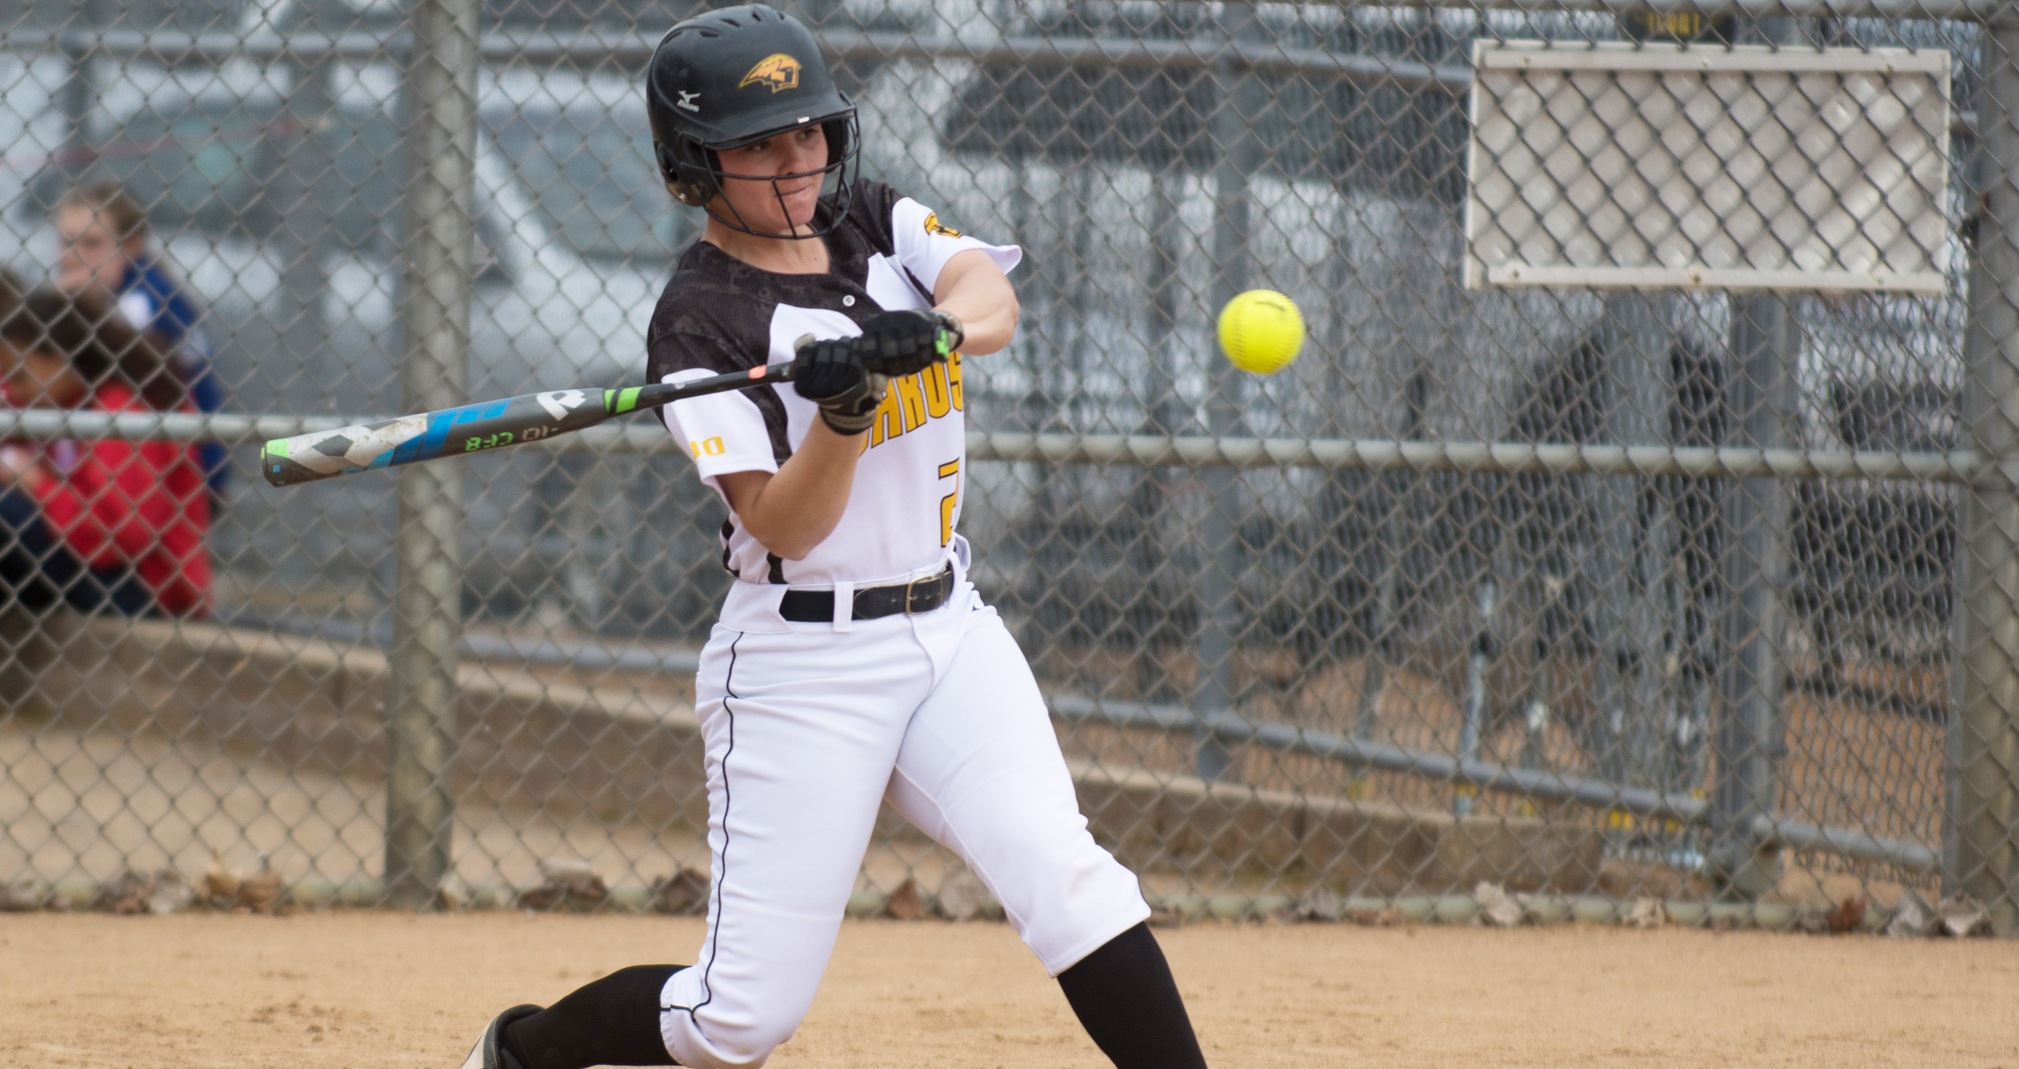 Amanda McIlhany scored the winning run in the bottom of the 11th inning of the second game against ninth-ranked UW-Eau Claire.